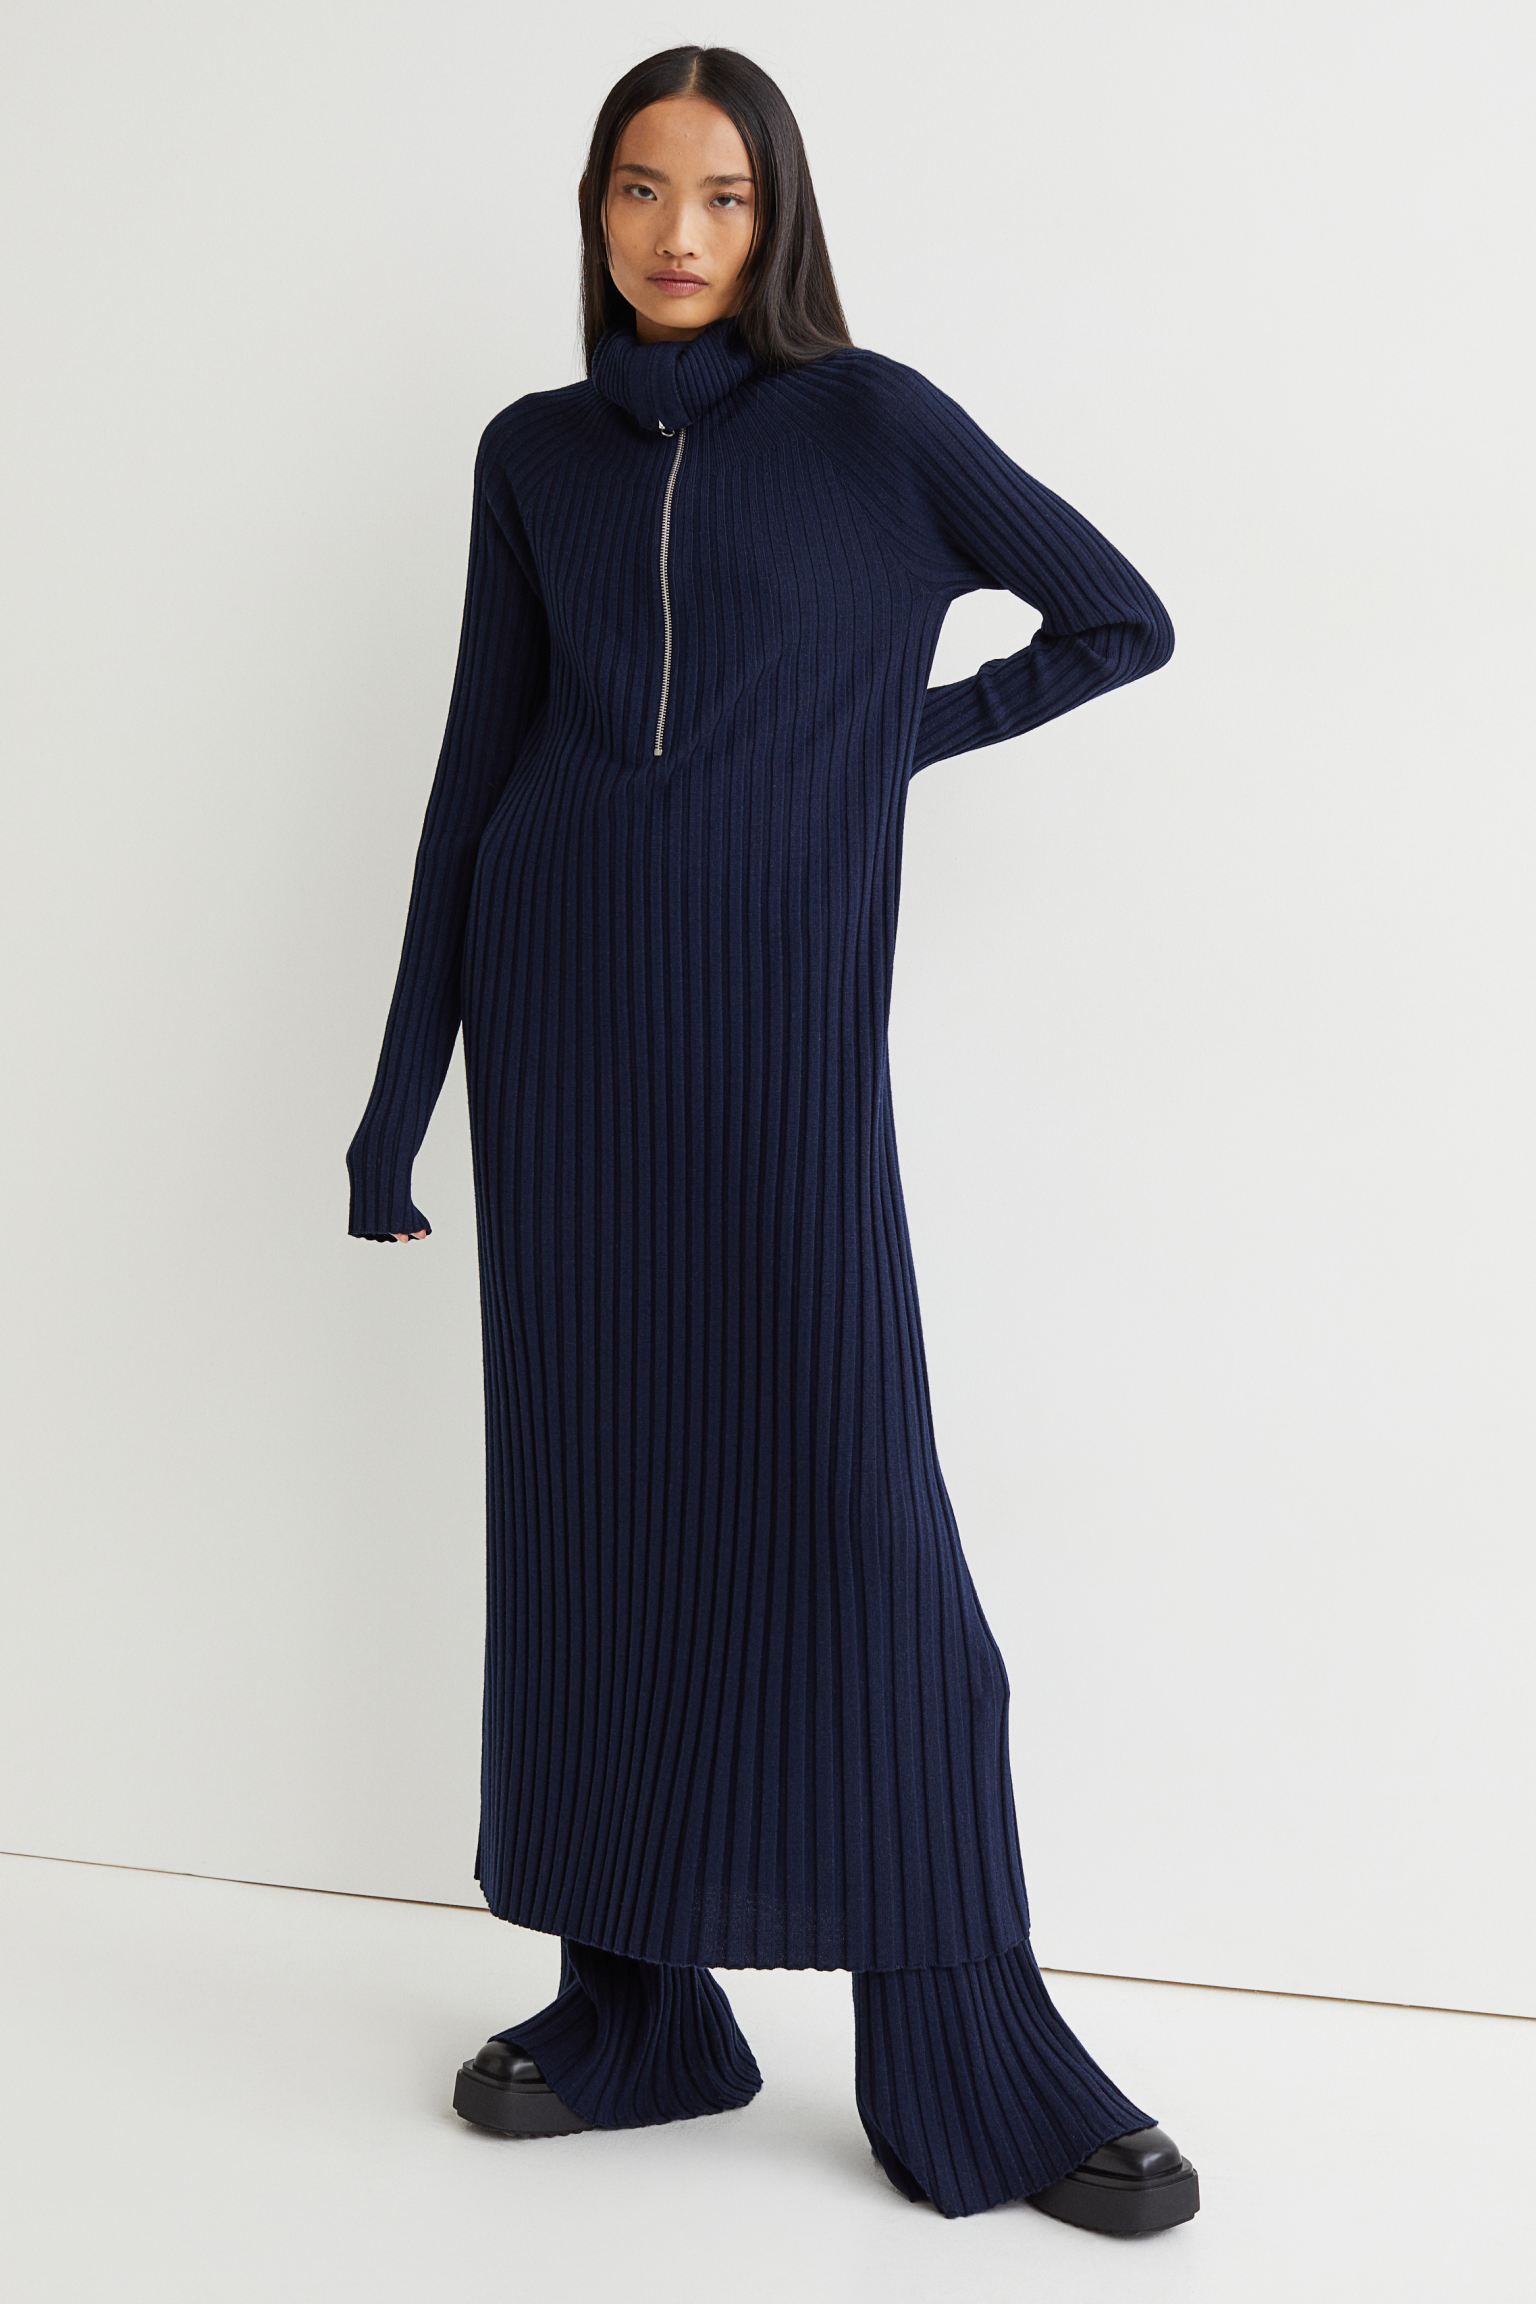 H&M Knitted Dress